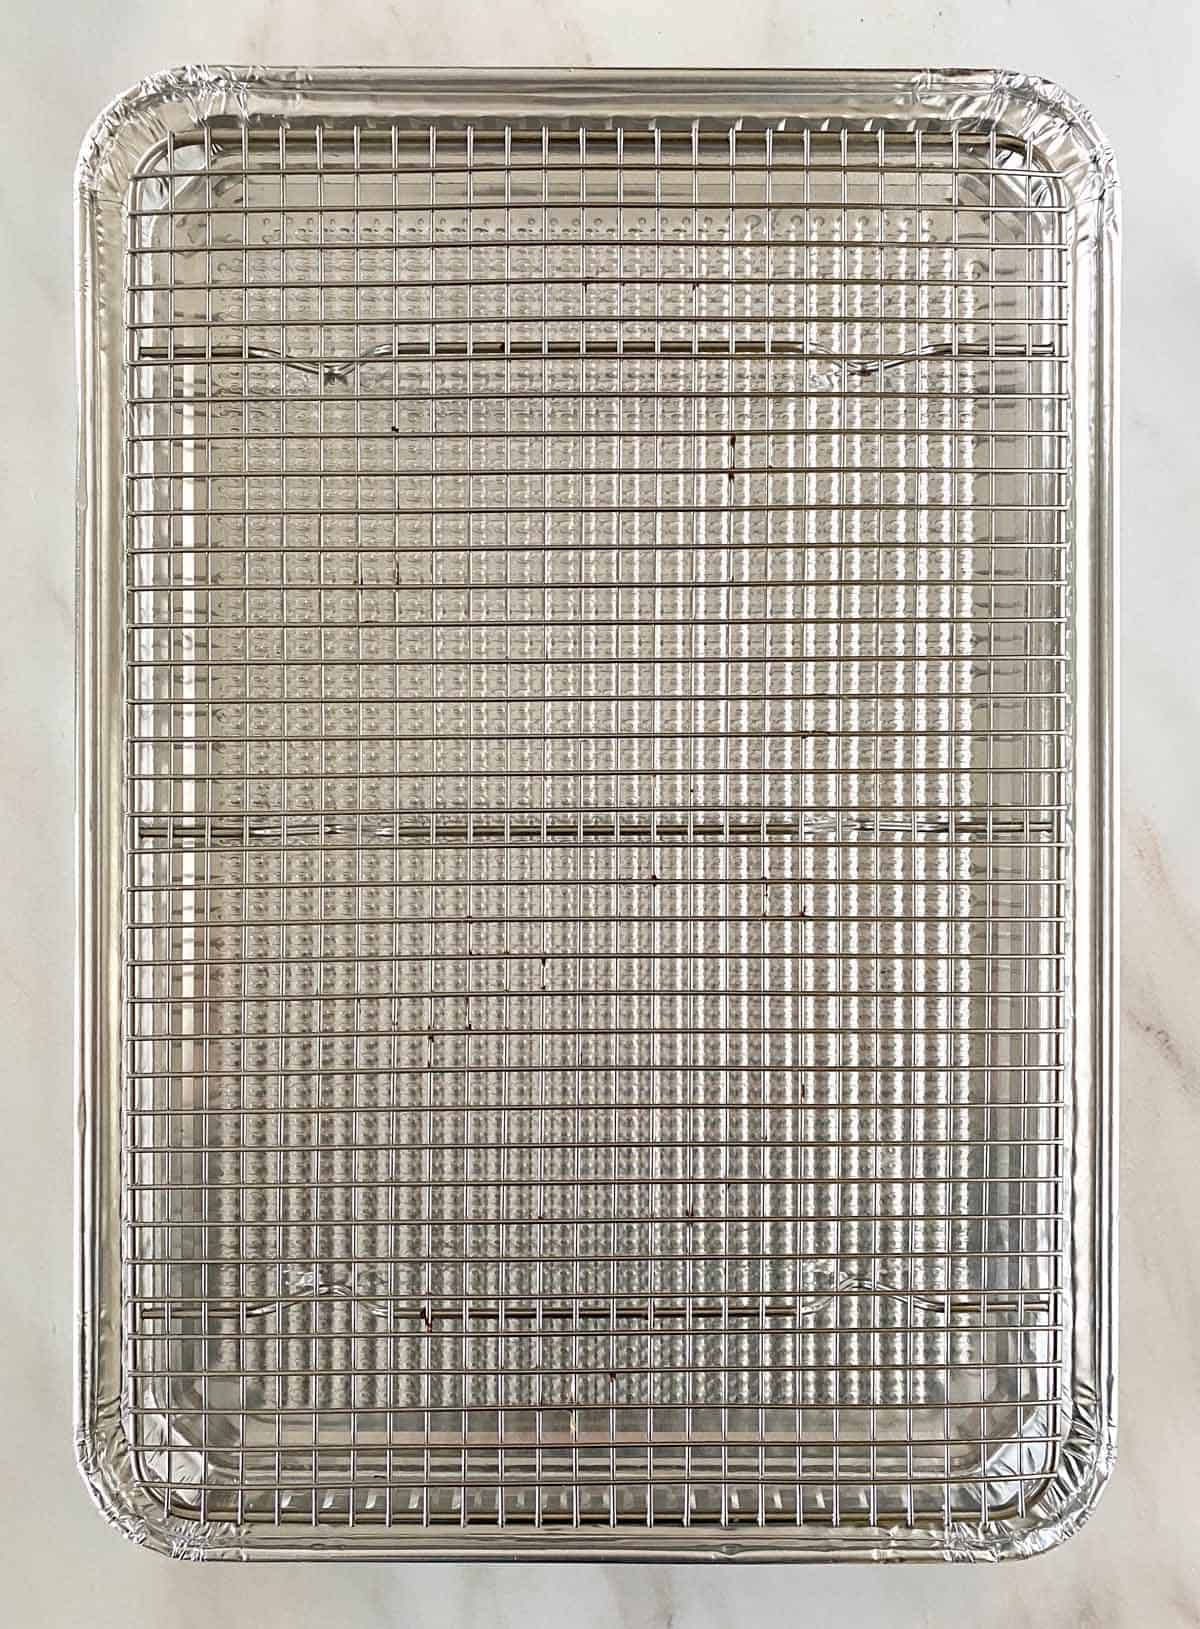 A disposable aluminum foil pan fitted with an oven proof baking rack.